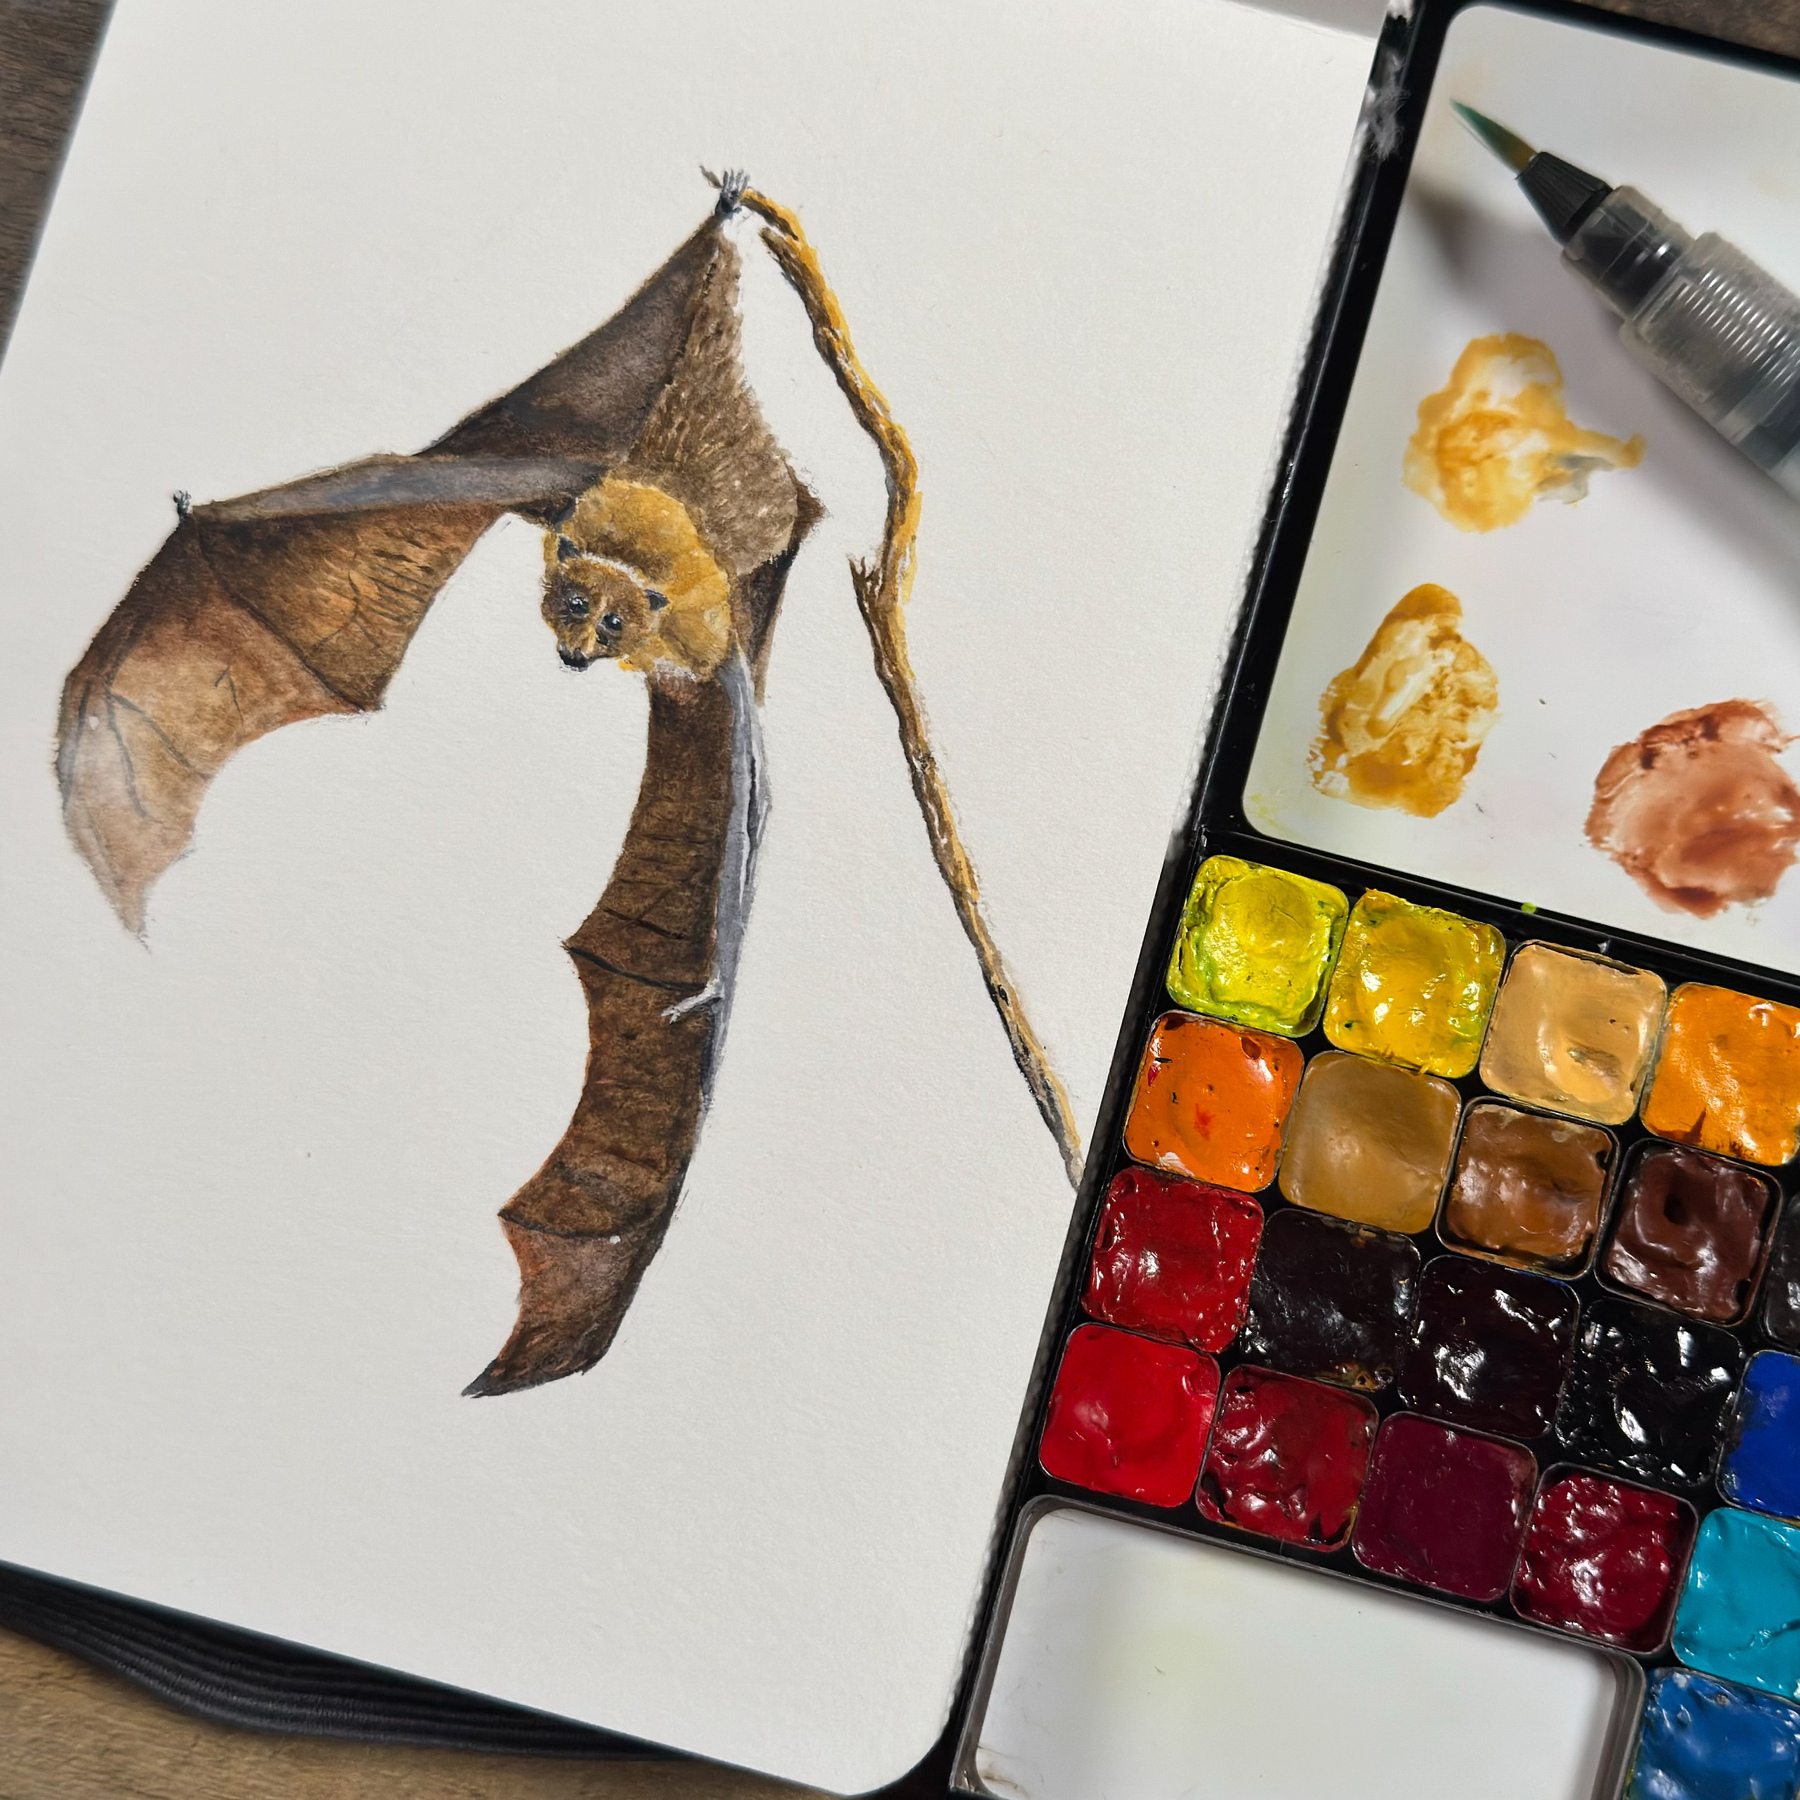 Watercolor painting of a fruit bat with wings spread, next to a watercolor palette and a Pentel aqua brush.&10;